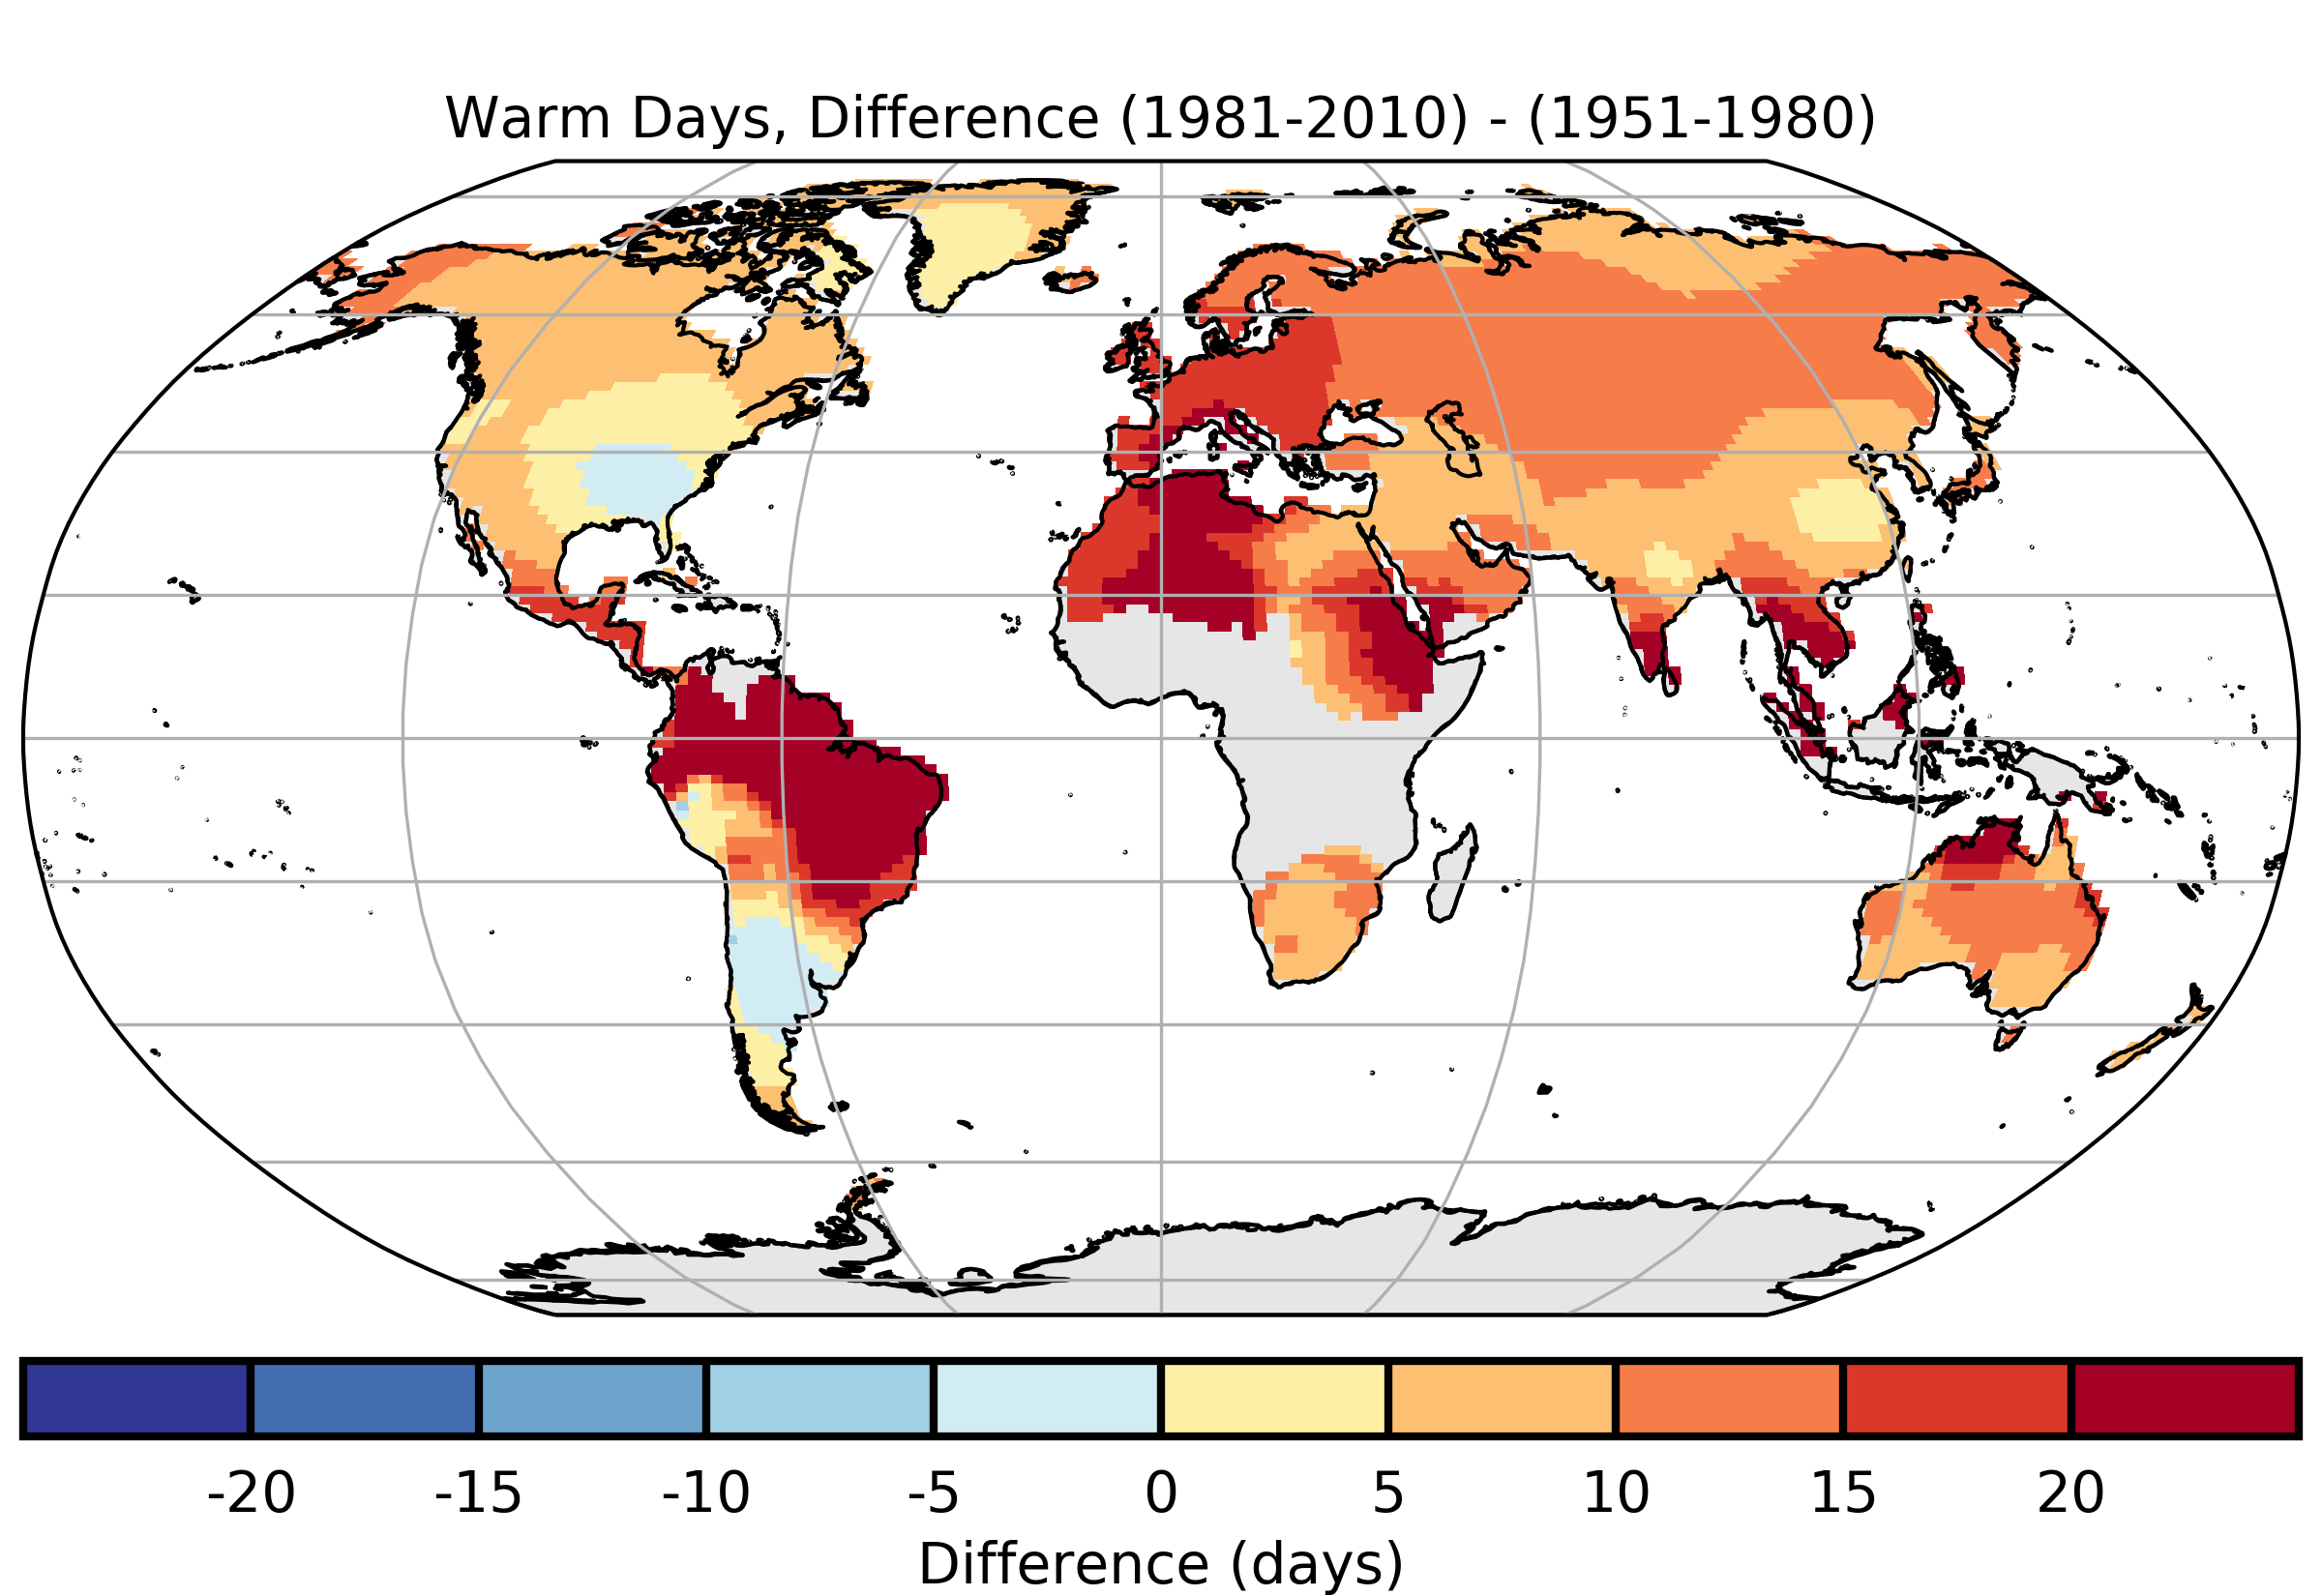 Global map showing the difference in the number of warm days, comparing 1981-2010 to 1951-1980. The greatest increase is seen in tropical regions of South America, Northern Africa and through Asia, recording 20+ more warm days.